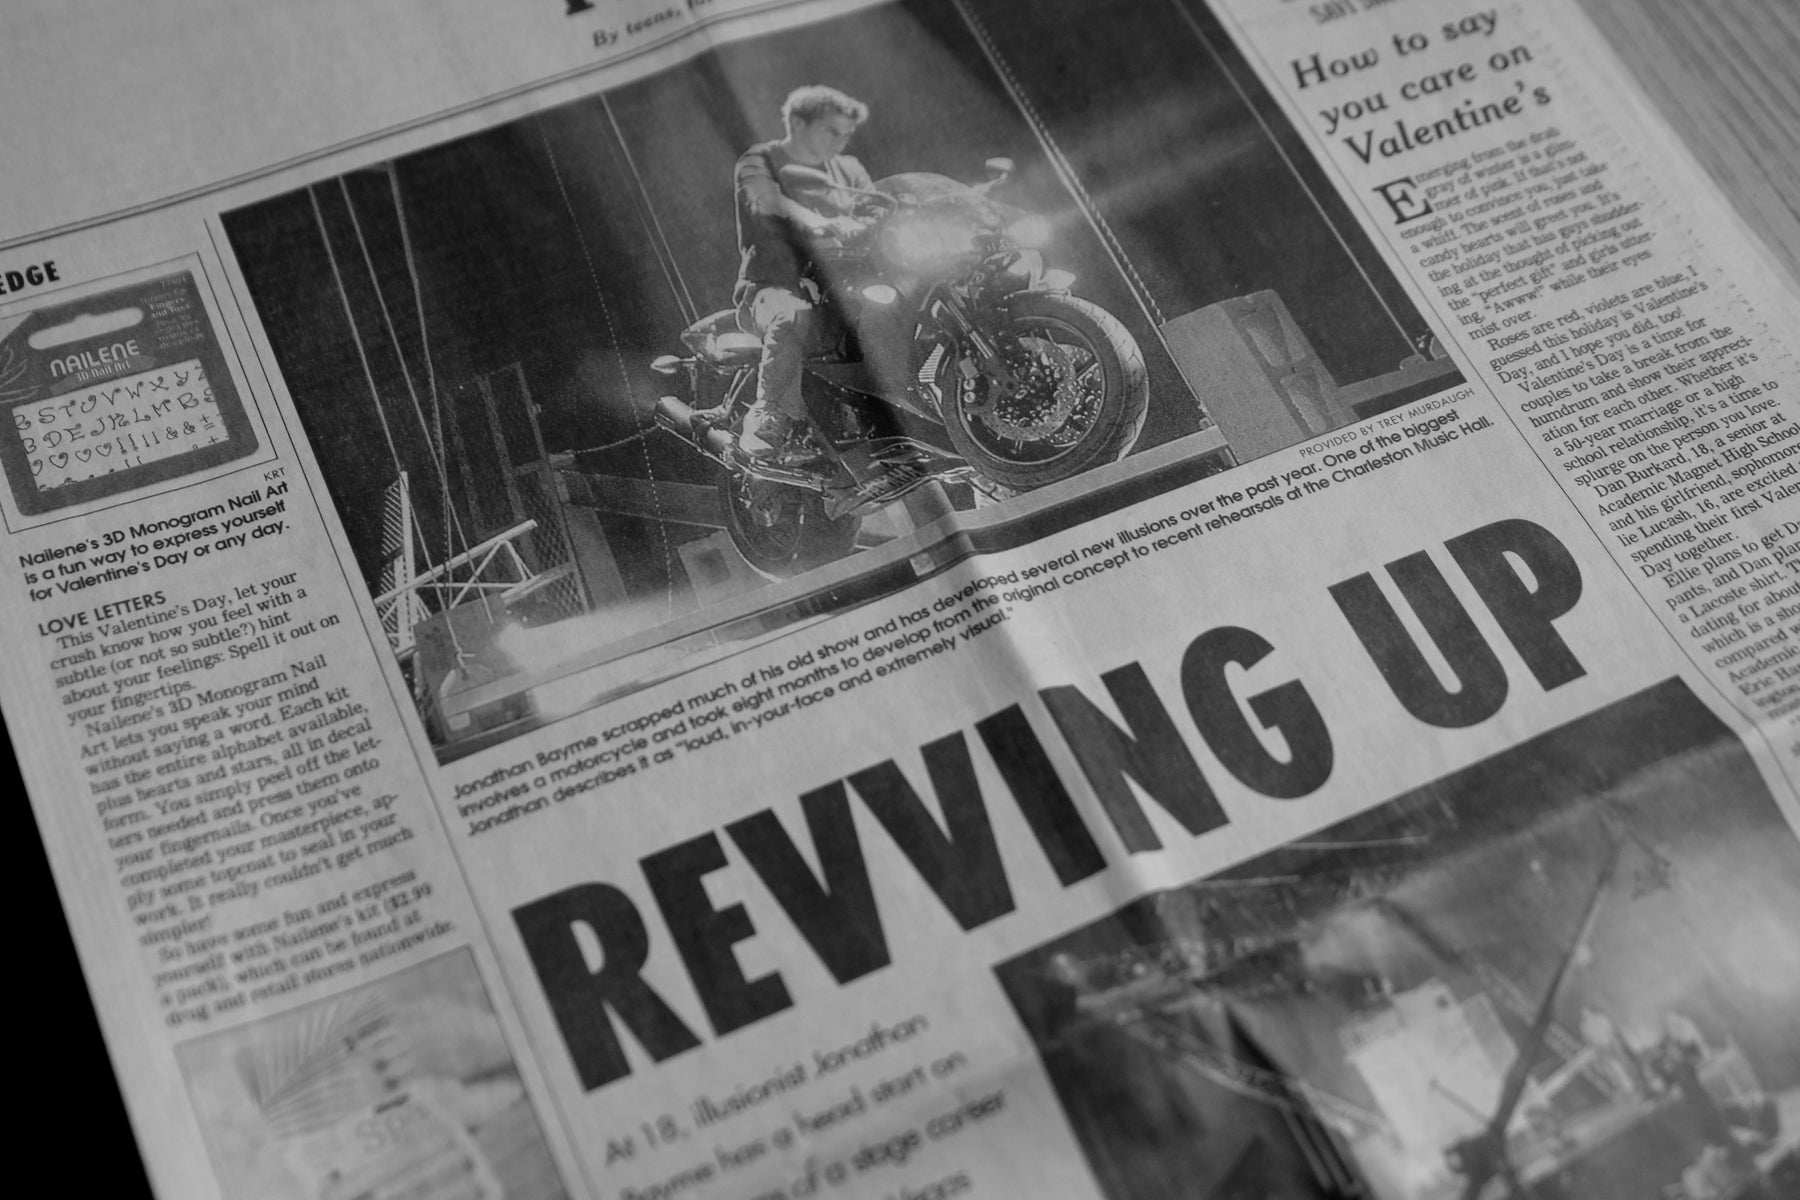 Newspaper clipping of Jonathan Bayme, founder of Theory11, on a motorcycle with a caption that reads "Revving Up", about a magic show he was performing at the age of 18 at the Charleston Music Hall in South Carolina.